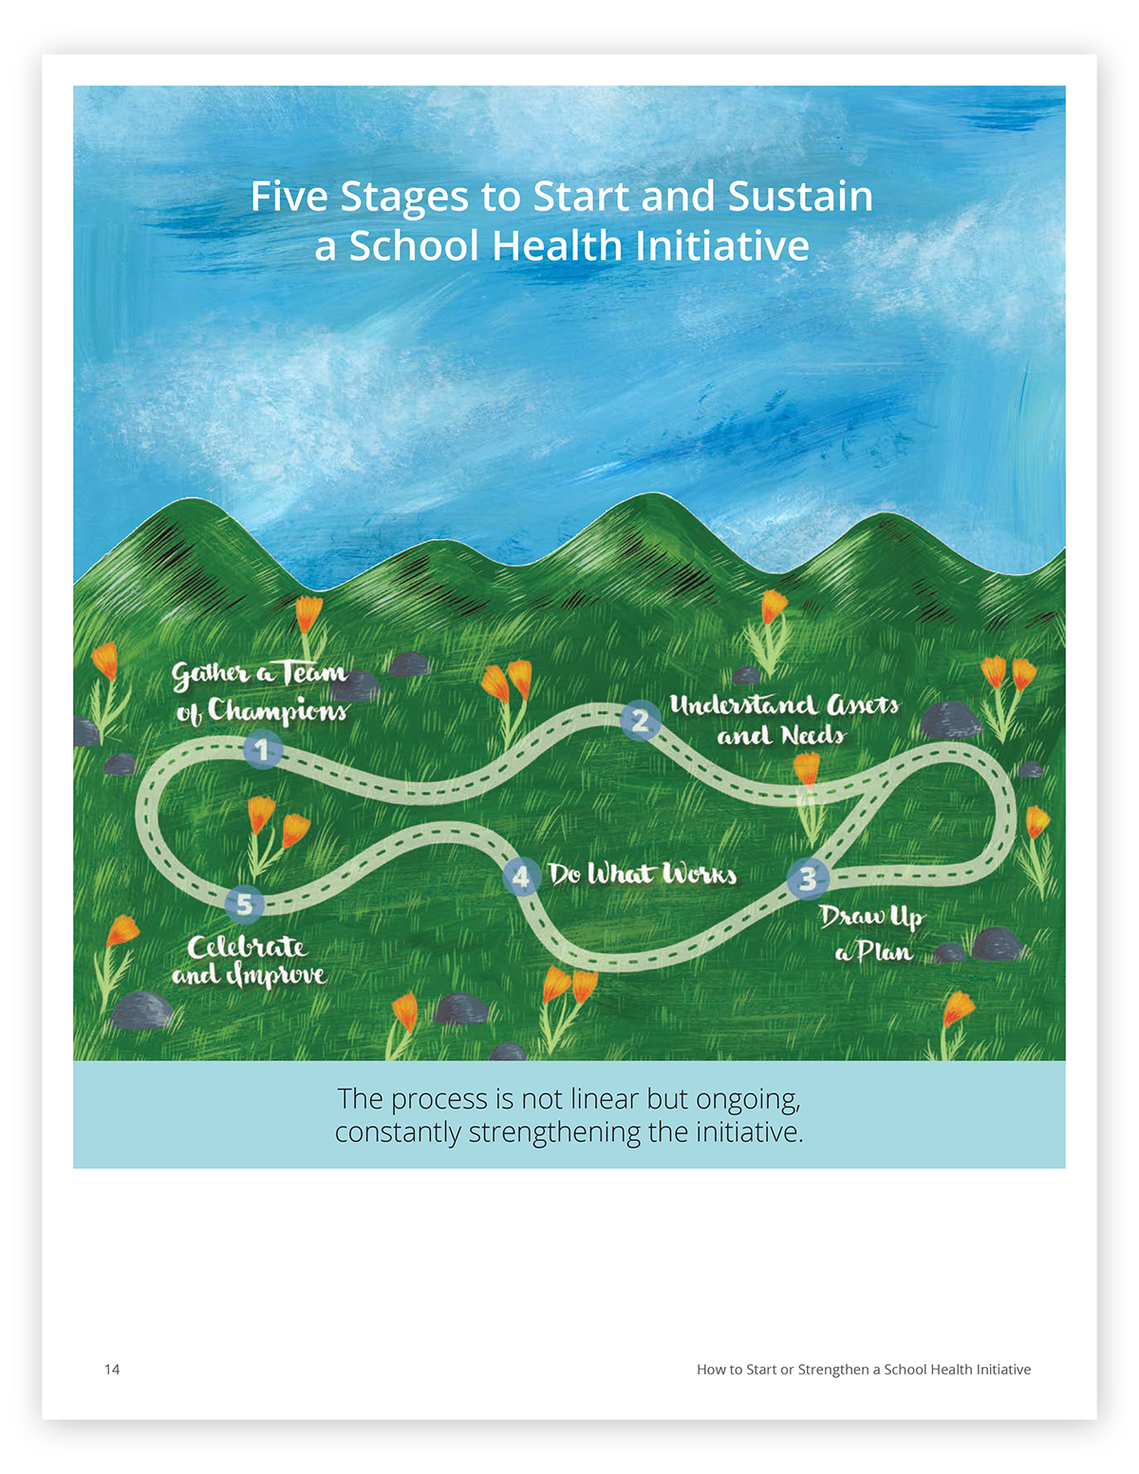 Page from the School Health Initiative report with a painting of a grassy hillside with flowers, and a road numbered and labeled with phrases that illustrate steps in a process.